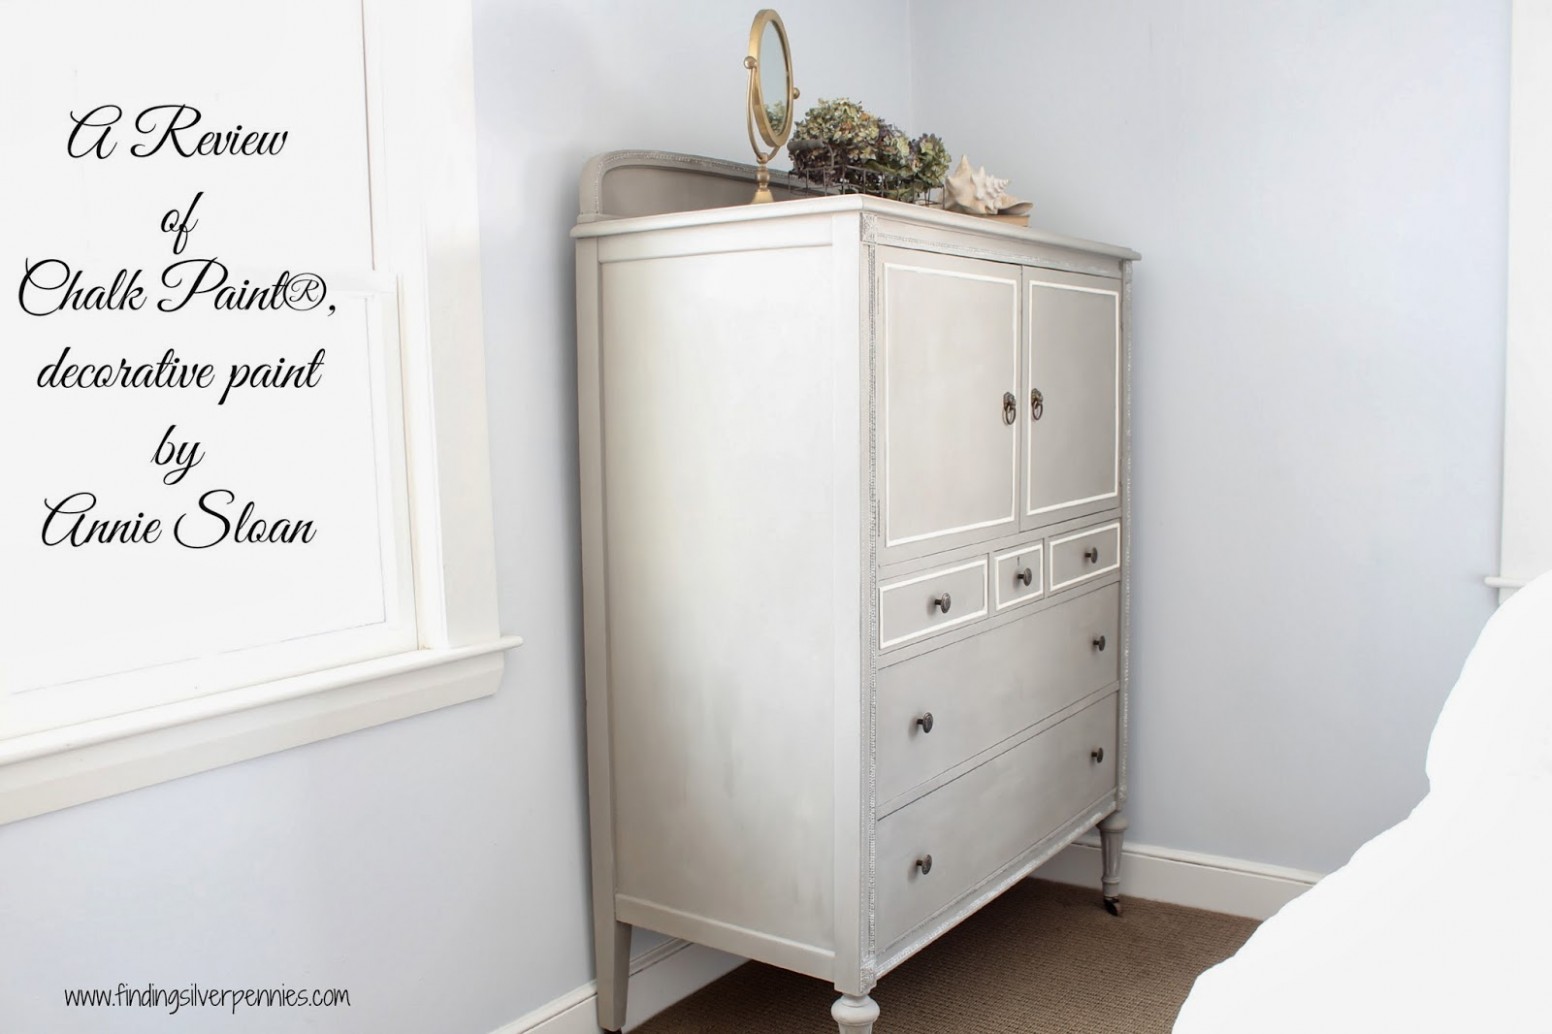 A Chalk Paint Review & The Clifton Armoire Finding Silver Pennies Annie Sloan Chalk Paint Near Me